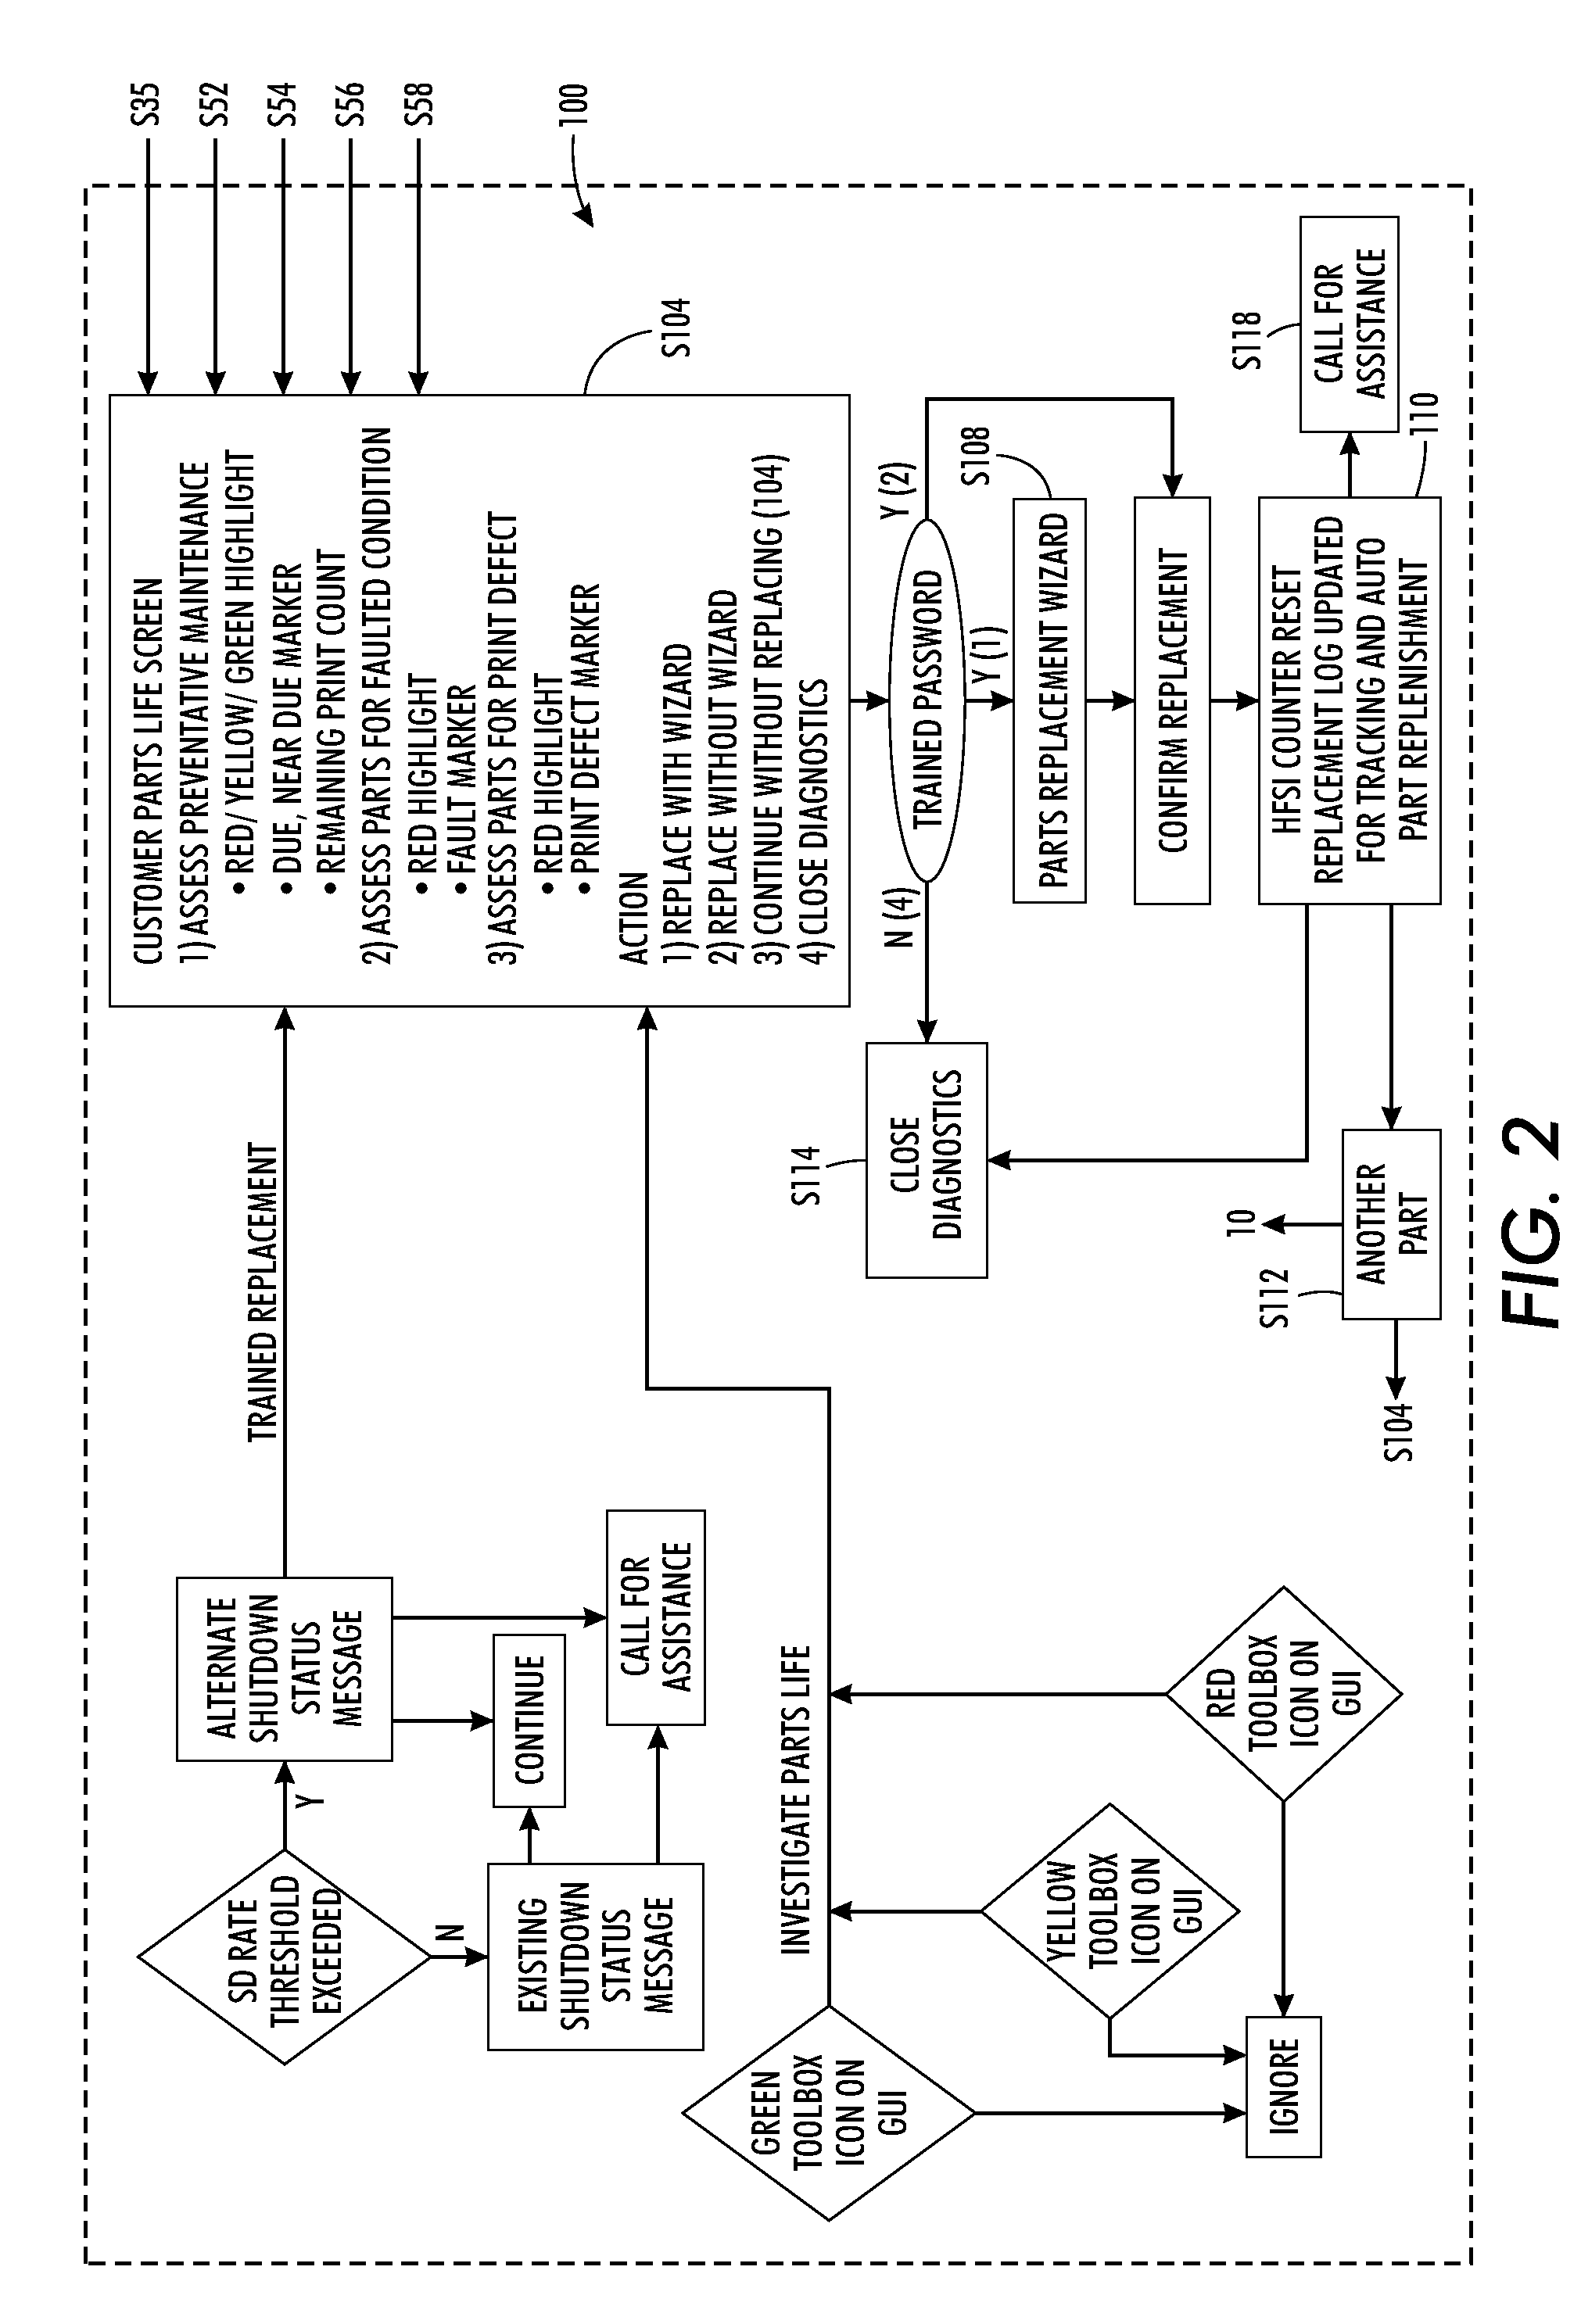 Customer part replacement feature utilizing high frequency service interval fault and signature analyses